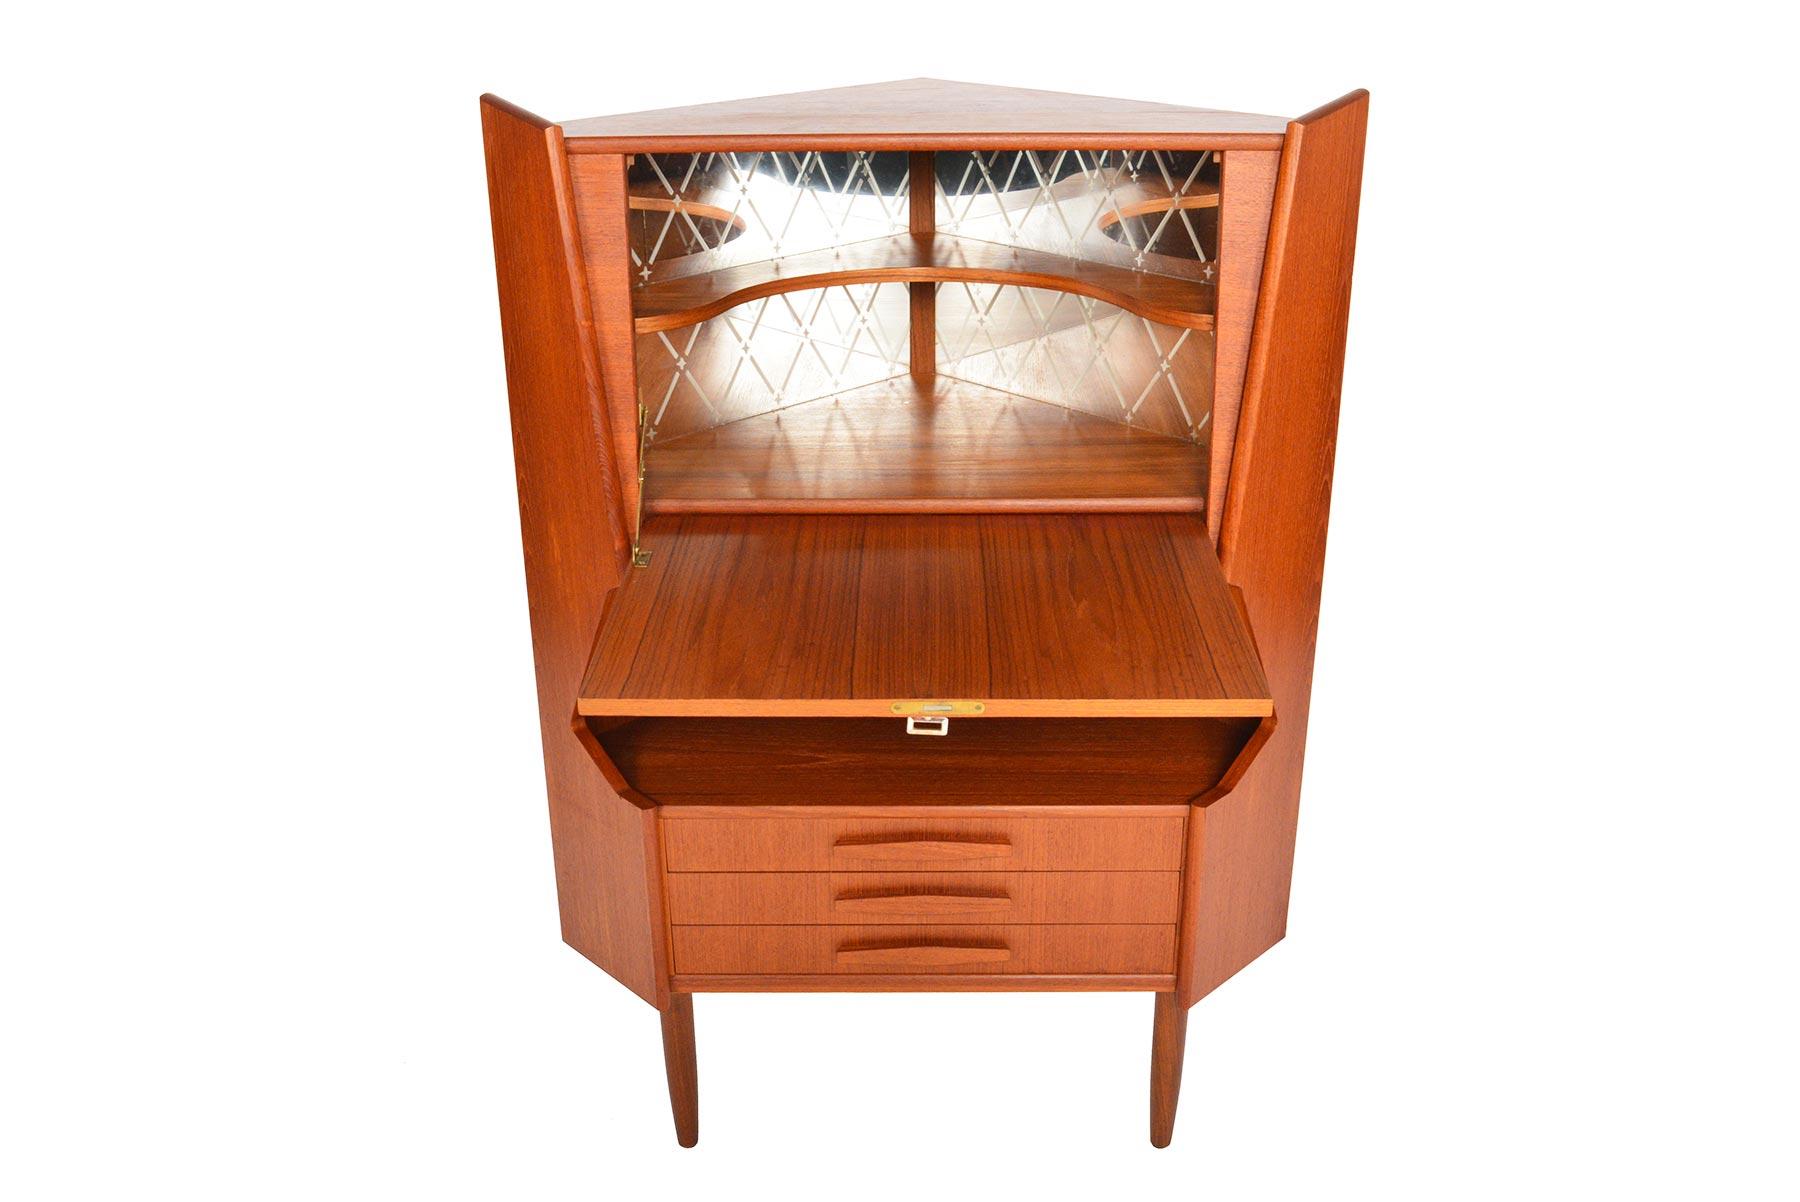 This fabulous Danish modern midcentury corner bar in teak will brighten up any modern home. Beautifully sculpted with atomic stylings, this piece offers a drop down door which opens to an etched mirror lined interior and black laminated shelf. Three